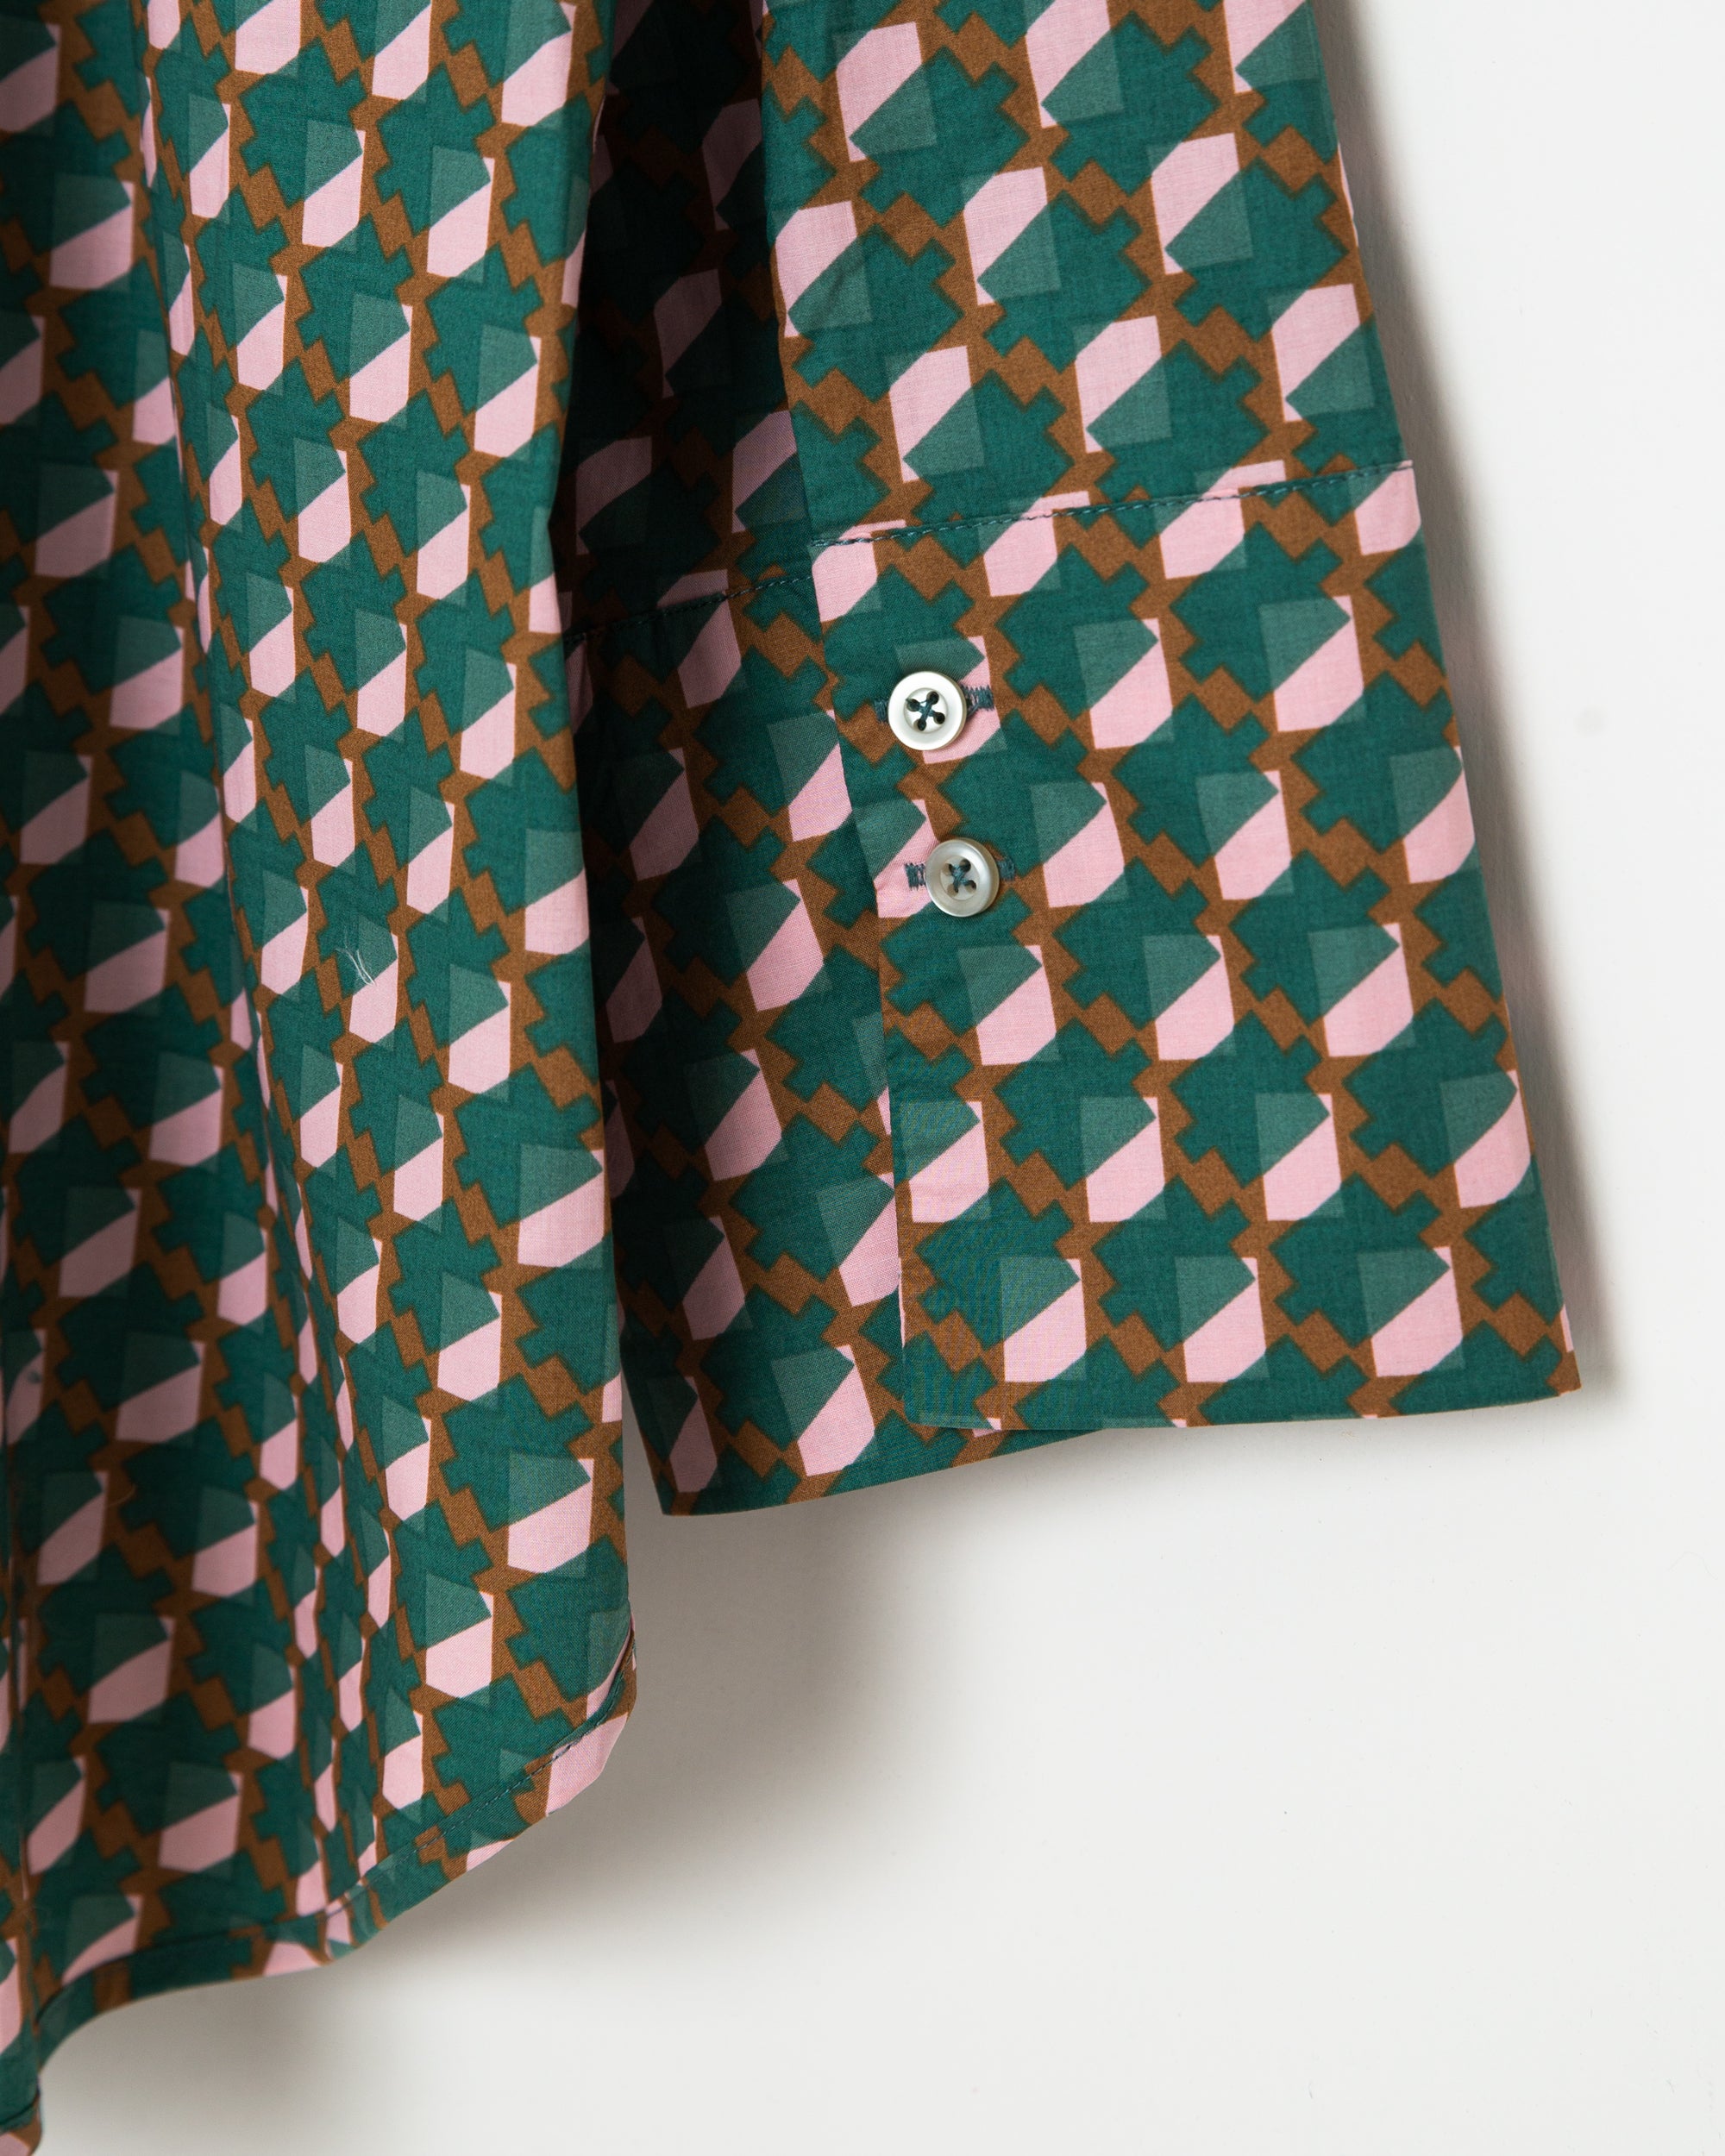 Geometrical Button Up